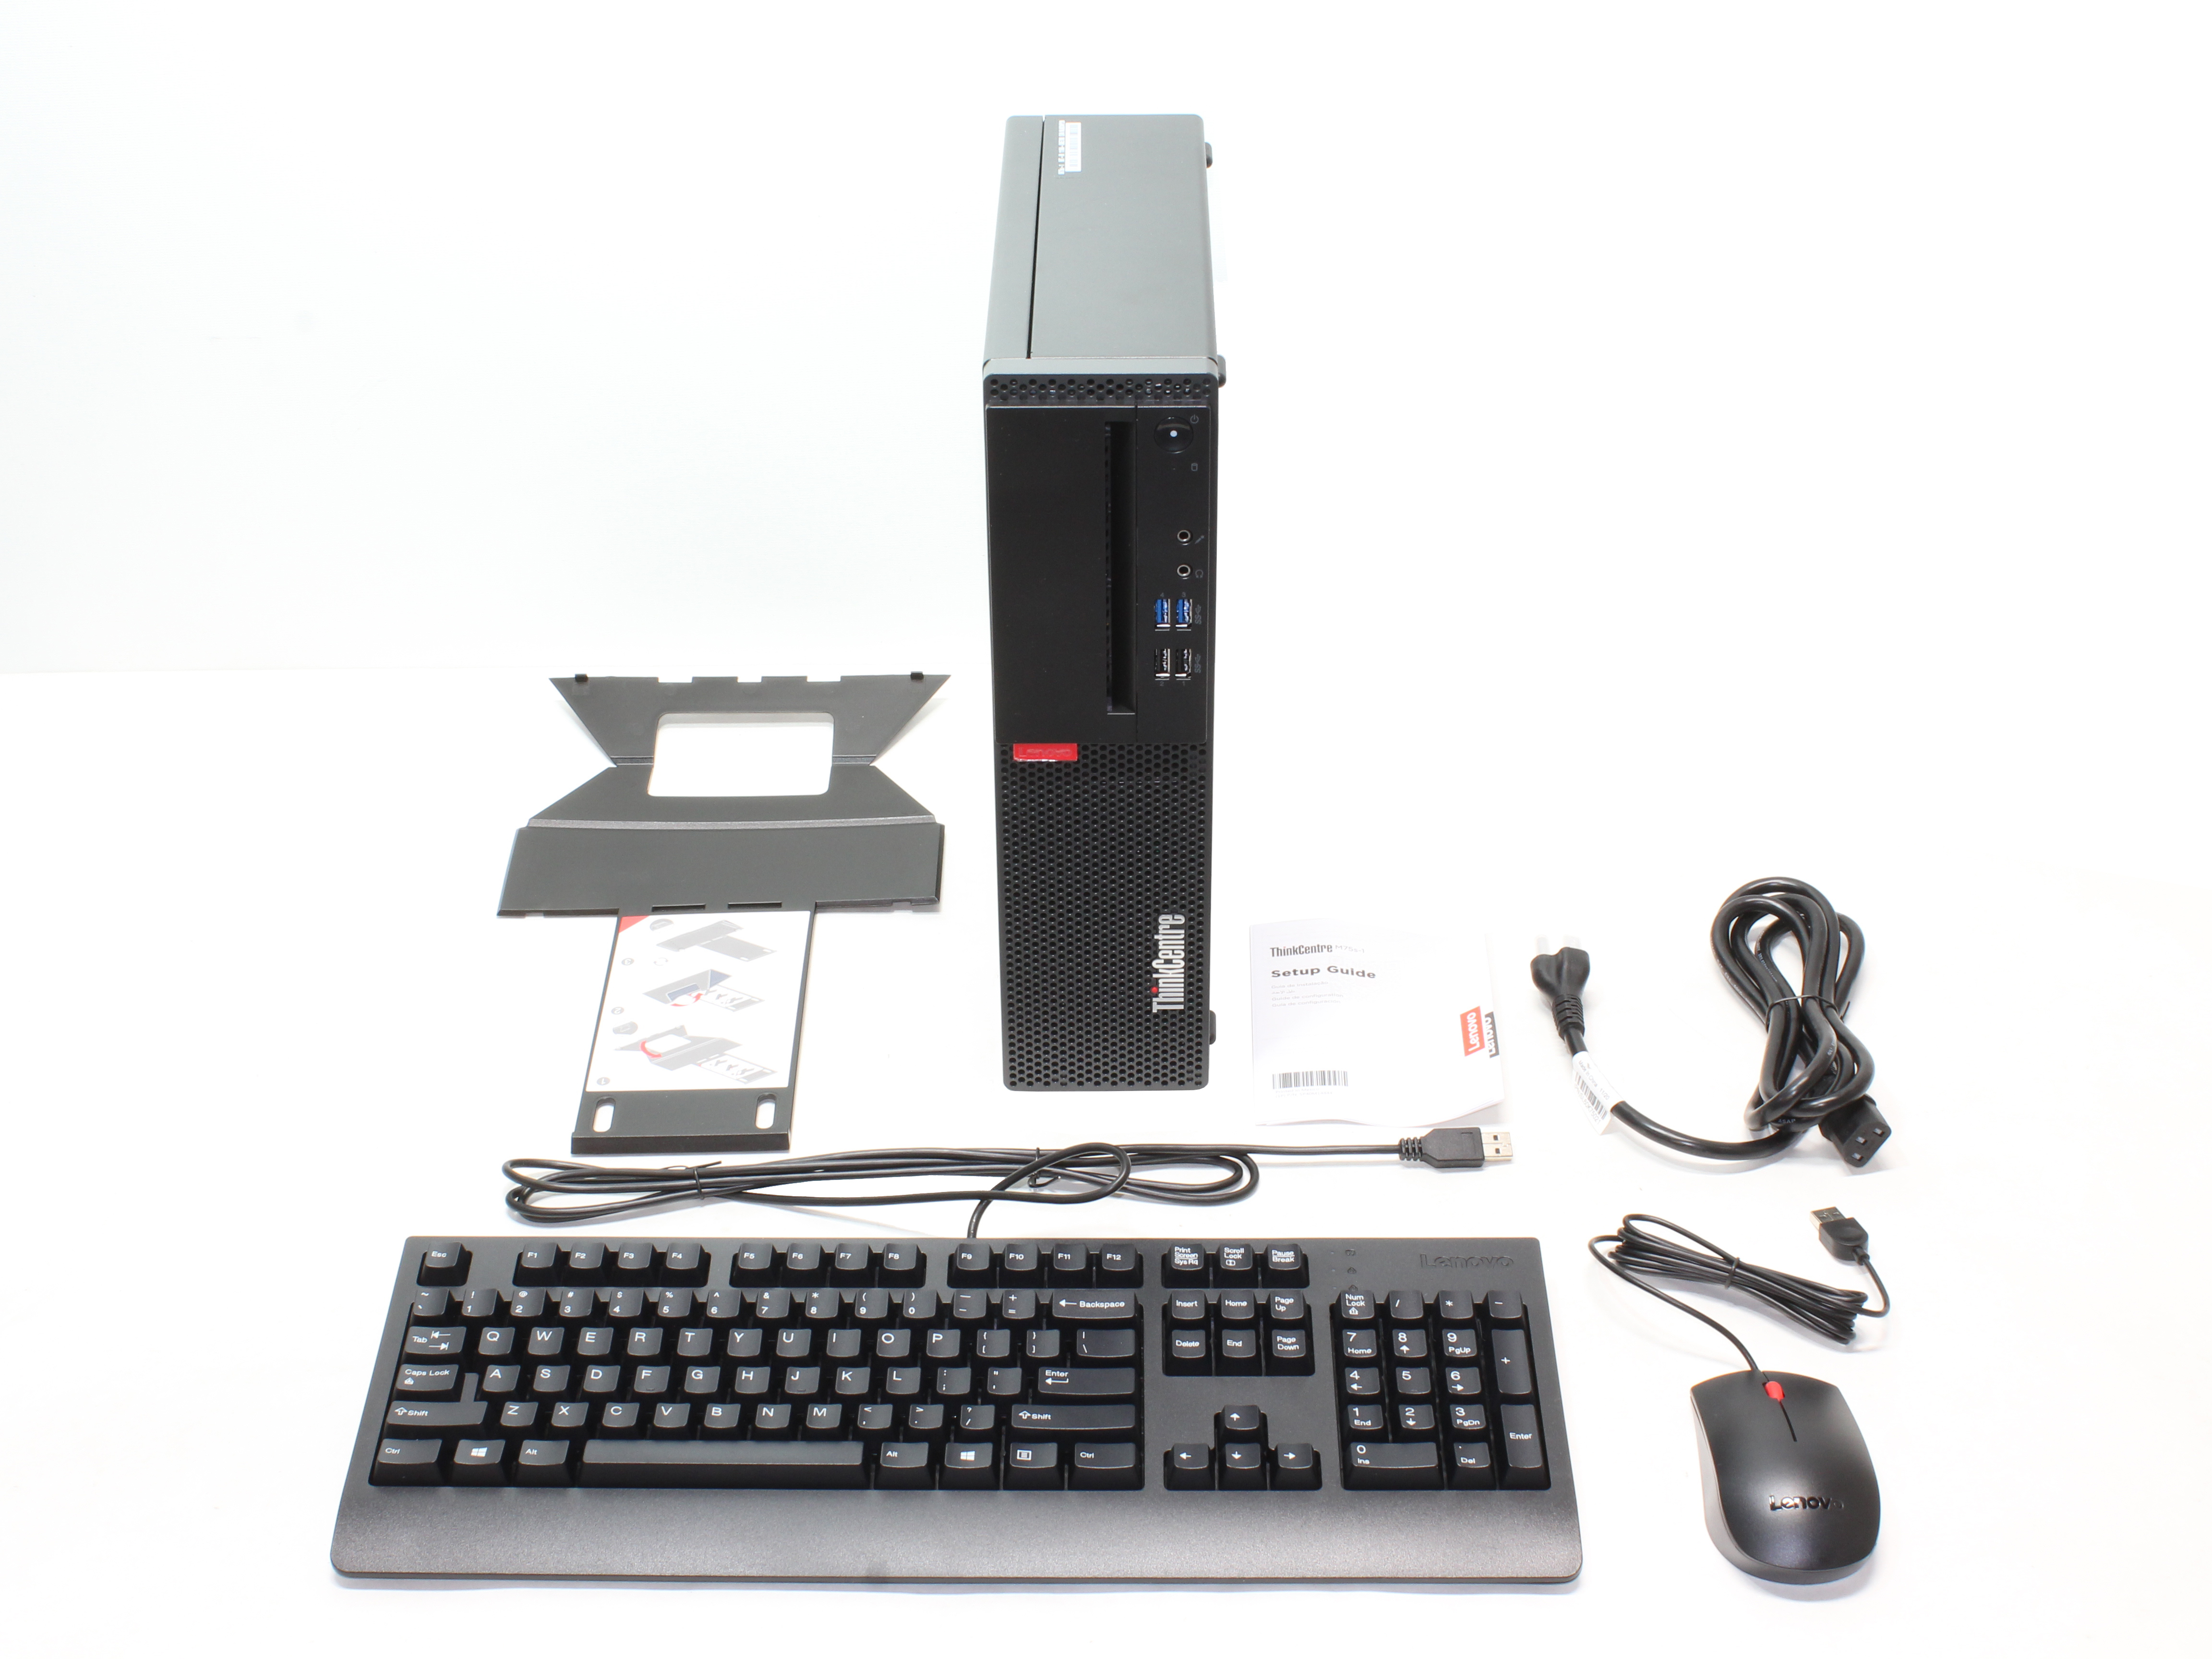 Lenovo ThinkCentre M75s-1 SFF Ryzen 5 Pro 3400G 4.2 GHz RAM 8GB SSD 128GB  Win 10 11AAS0E700 [11AAS0E700] - $939.99 : Professional Multi Monitor  Workstations, Graphics Card Experts